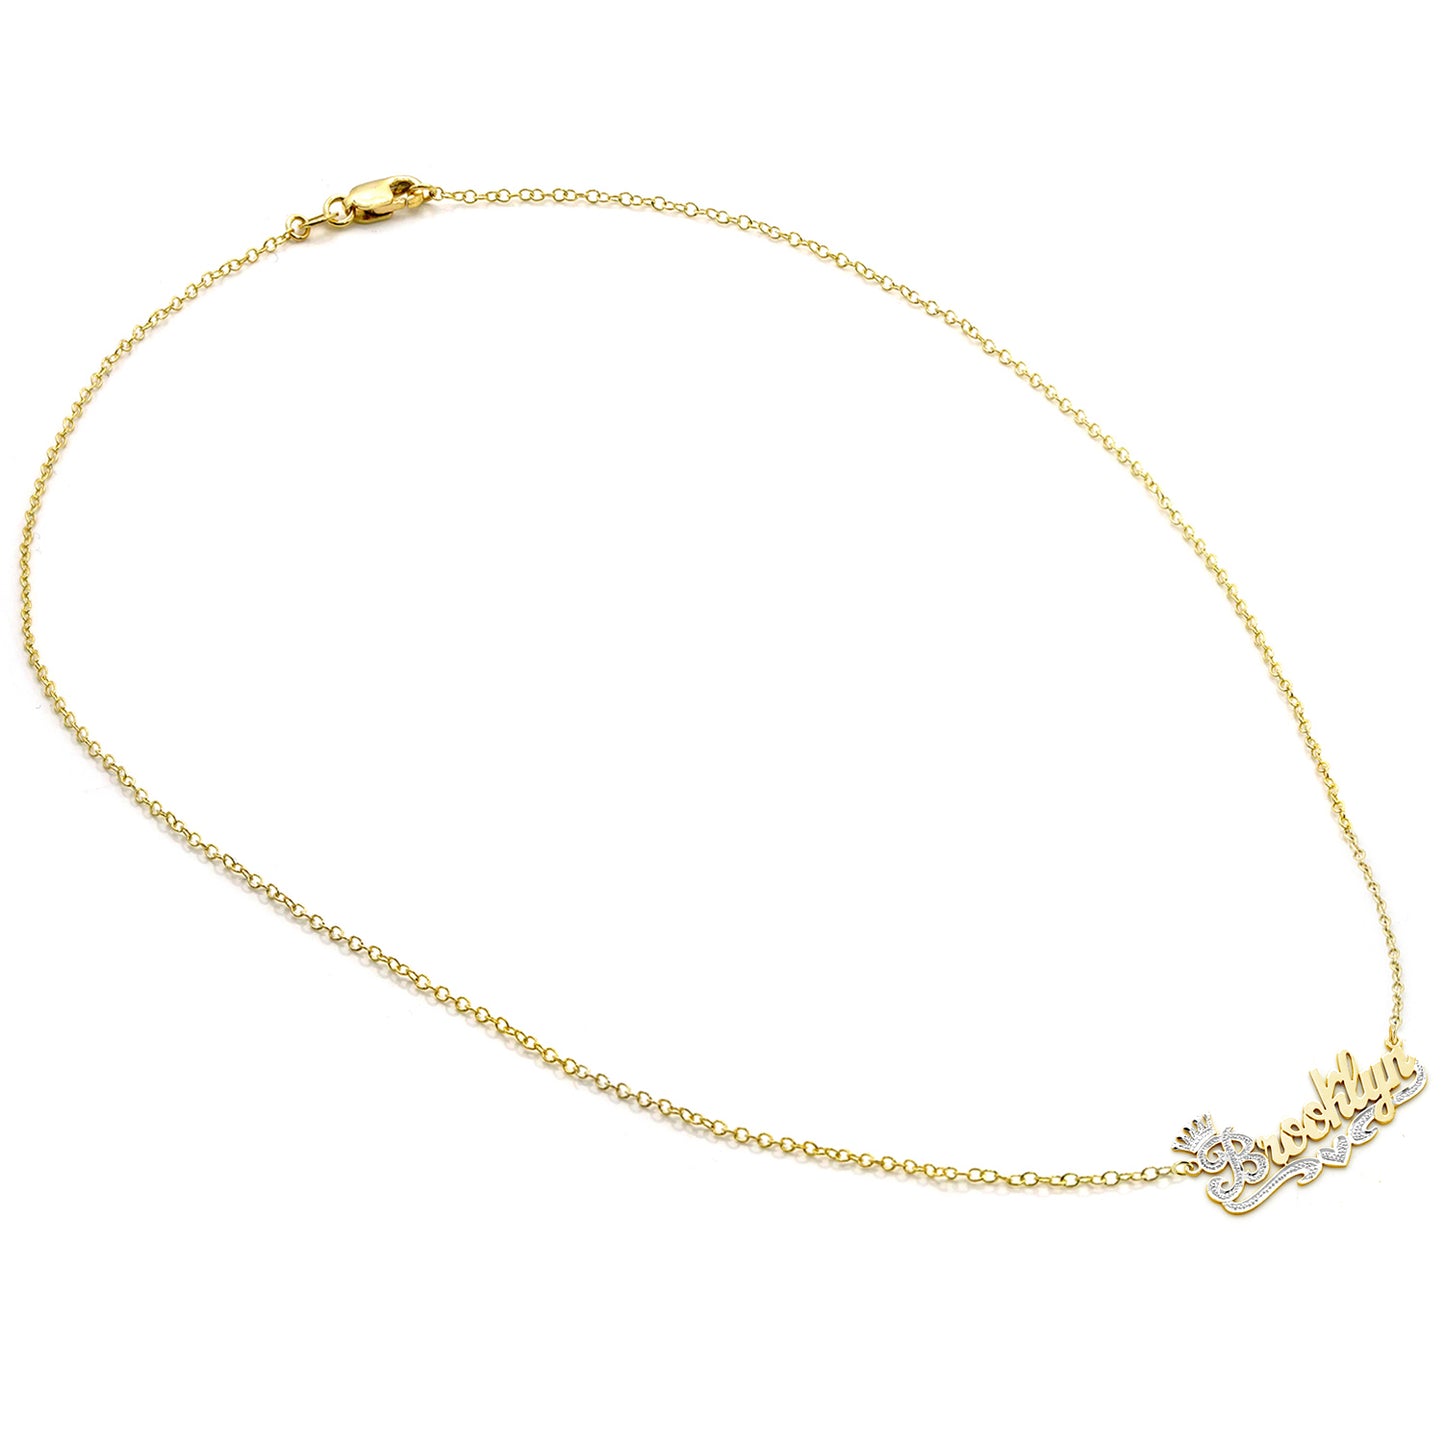 Crowned Nameplate Pendant Necklace with Rhodium Sparkle on High Polished 14K Gold